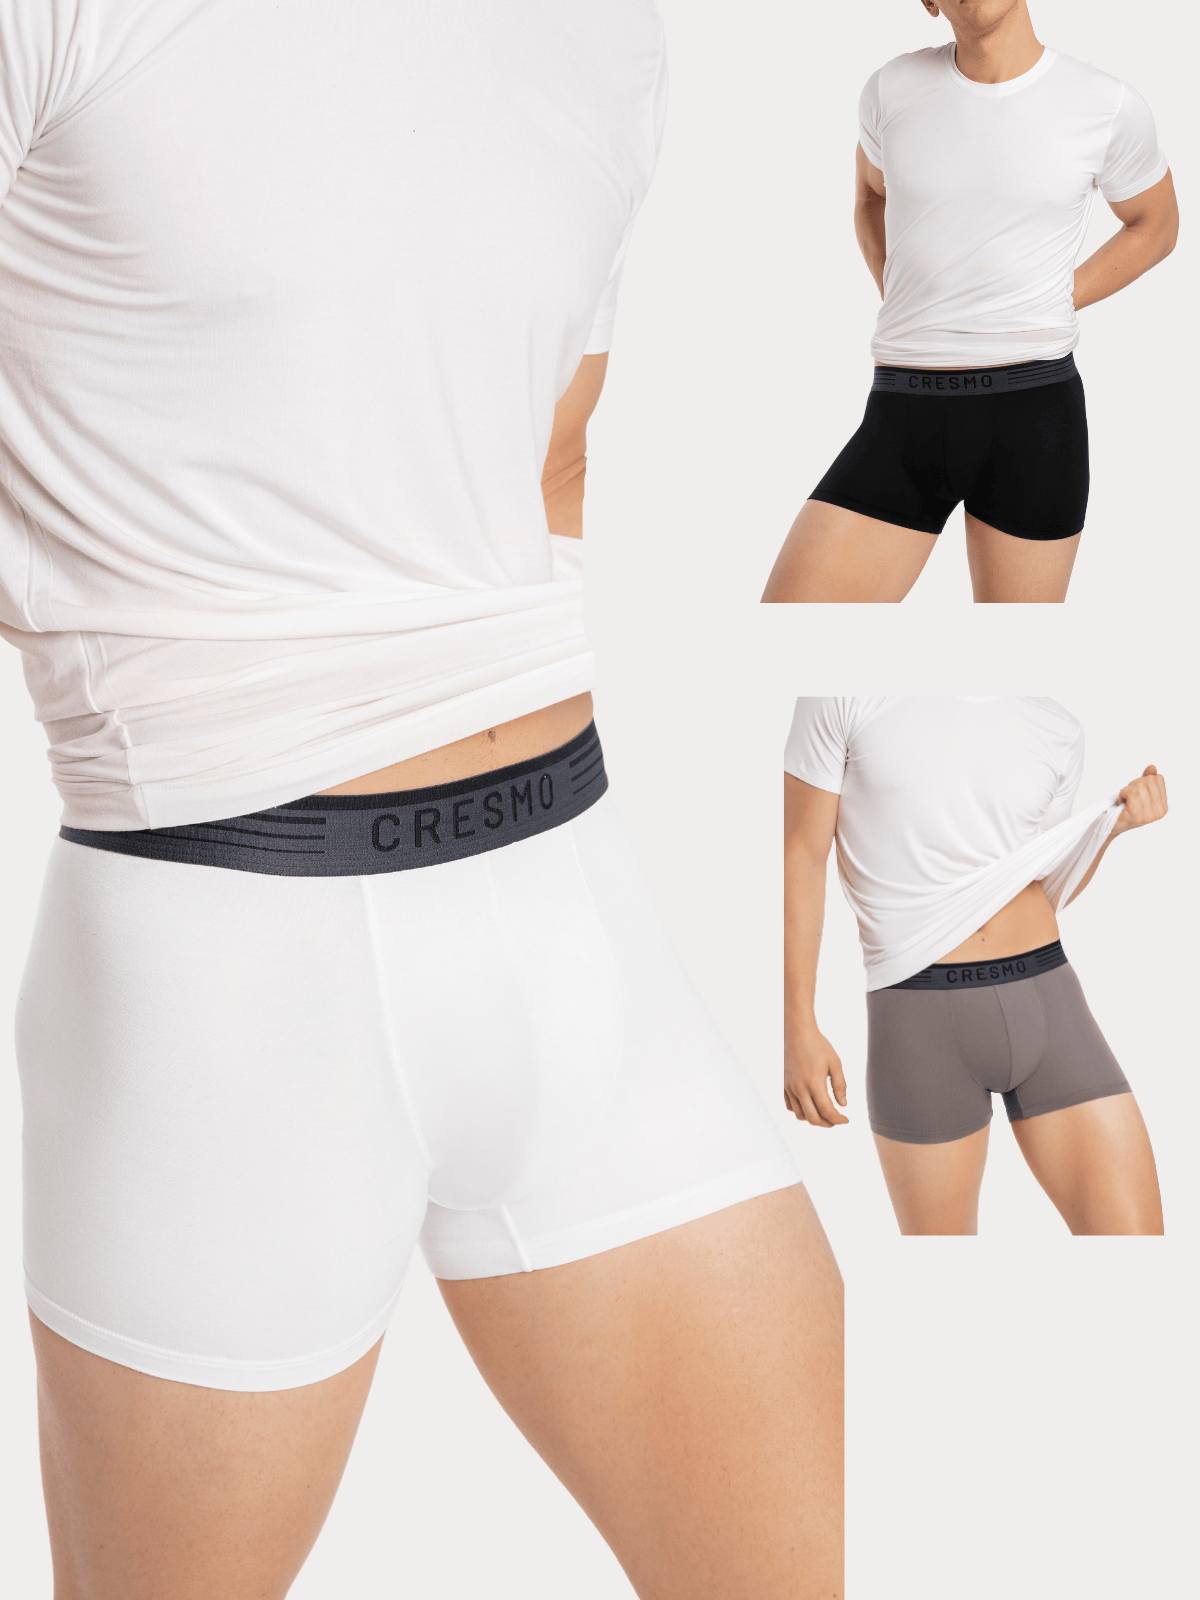 CRESMO | CRESMO Men's Anti-Microbial Micro Modal Underwear Breathable Ultra Soft Trunk (Pack of 3)